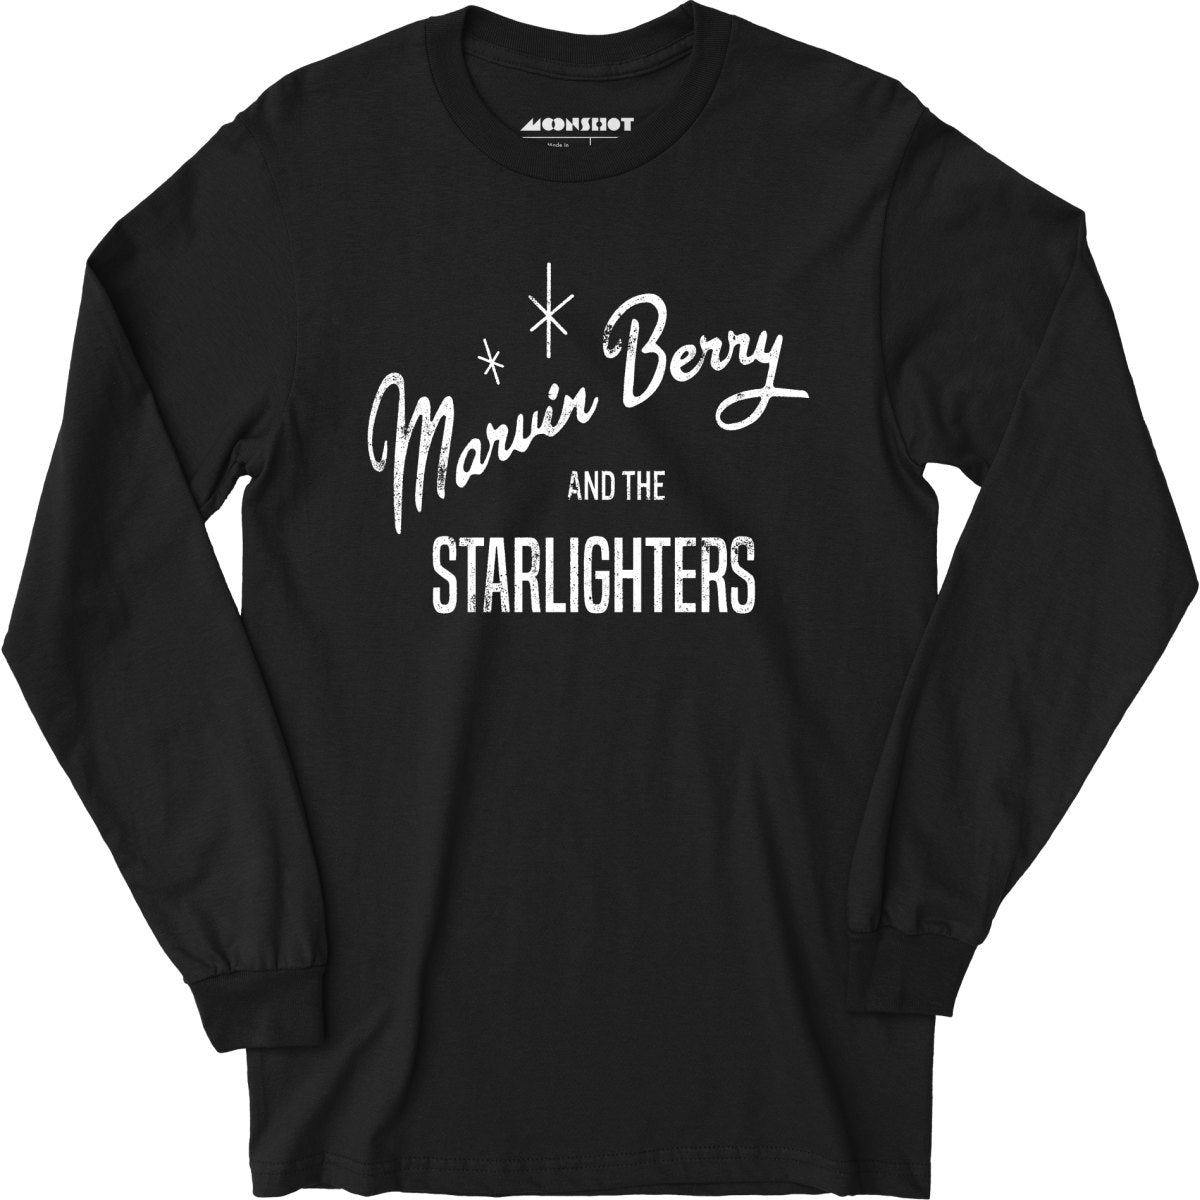 Marvin Berry and The Starlighters - Long Sleeve T-Shirt